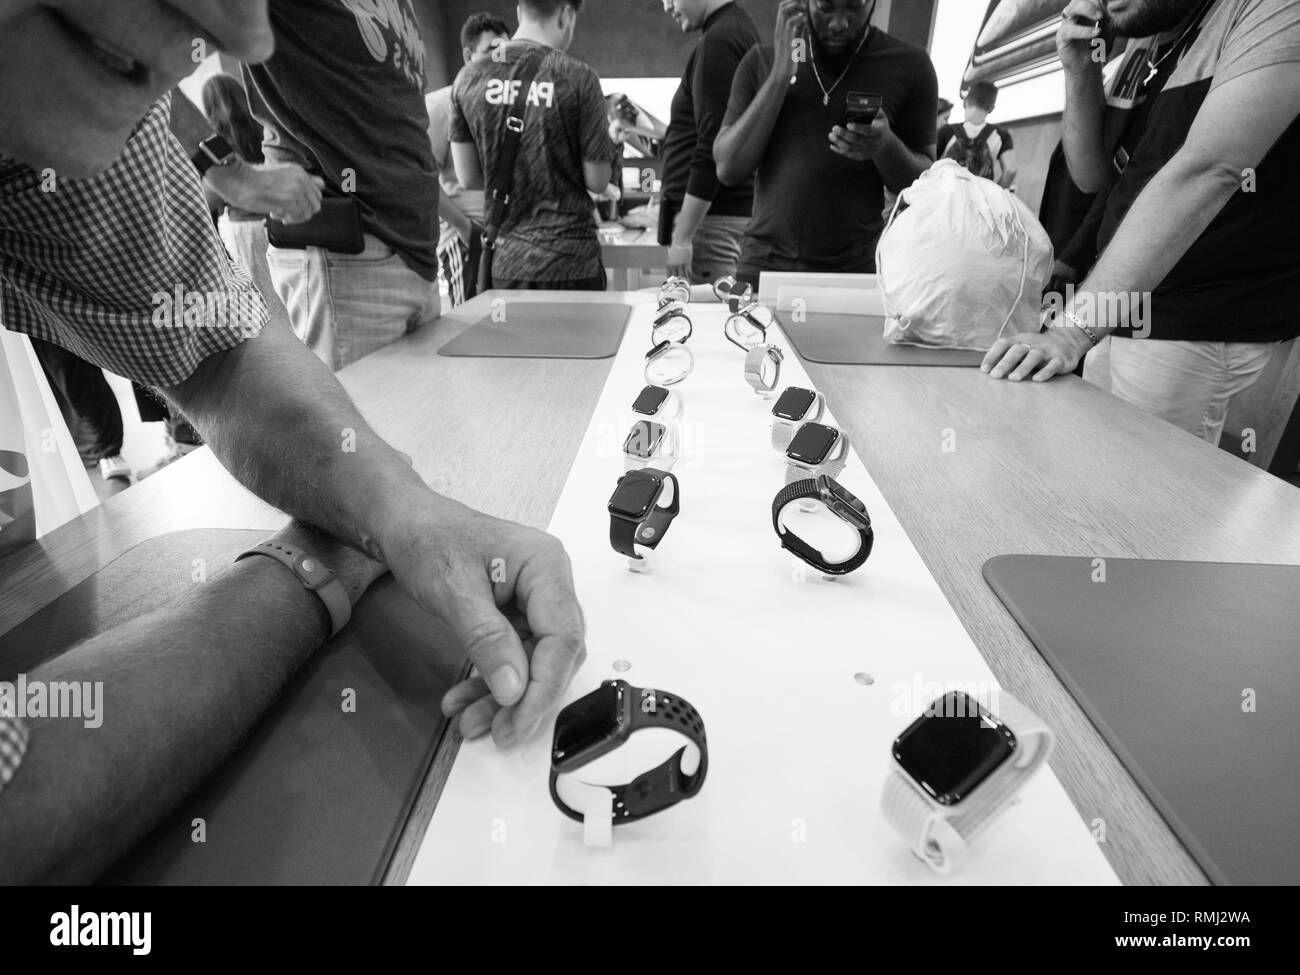 STRASBOURG, FRANCE - SEP 21, 2018: Curious senior man testing the Nike Apple Watch Series 4 GPS LTE smartwatch in Apple Store with customers silhouettes in background black and white Stock Photo